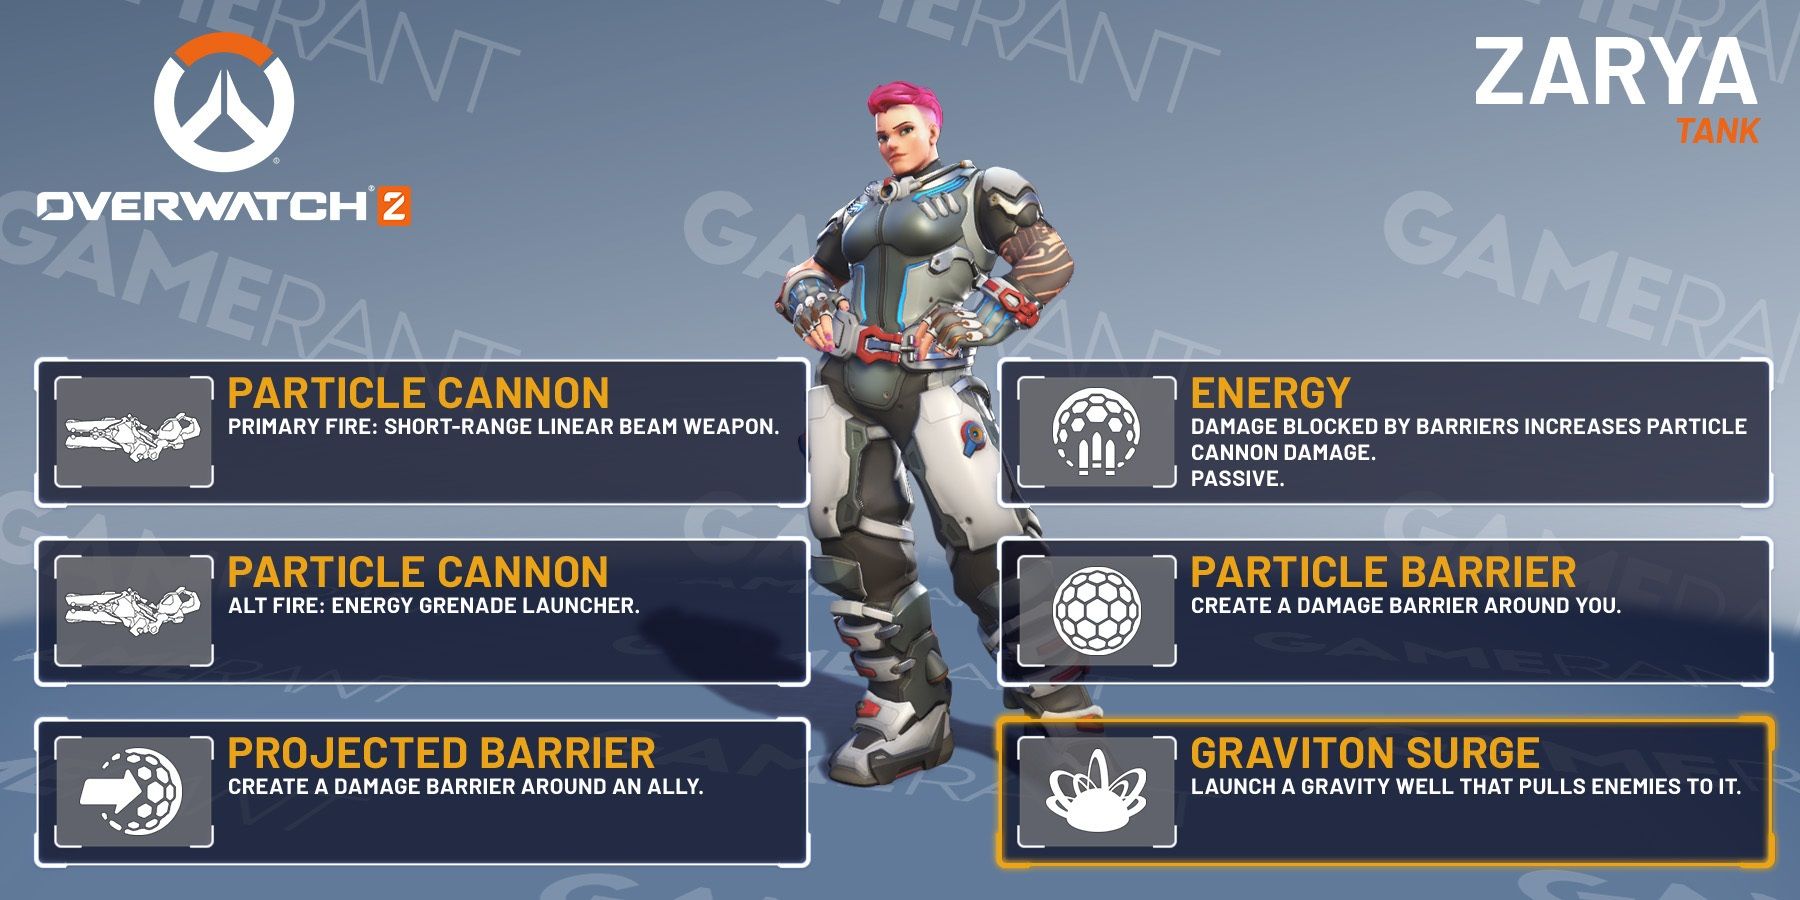 How to counter Zarya in Overwatch 2?